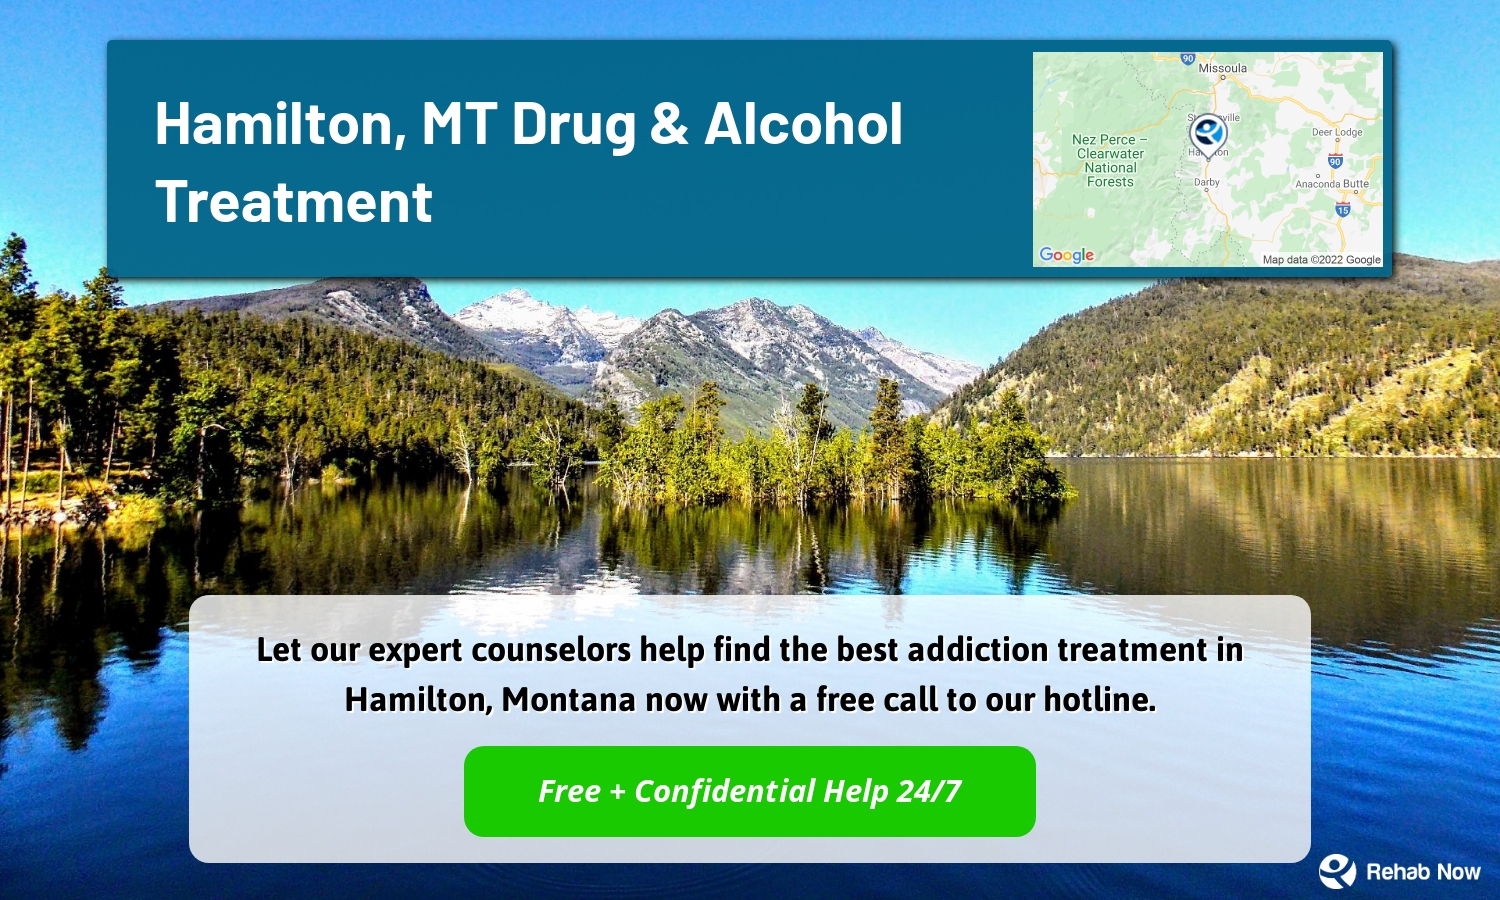 Let our expert counselors help find the best addiction treatment in Hamilton, Montana now with a free call to our hotline.